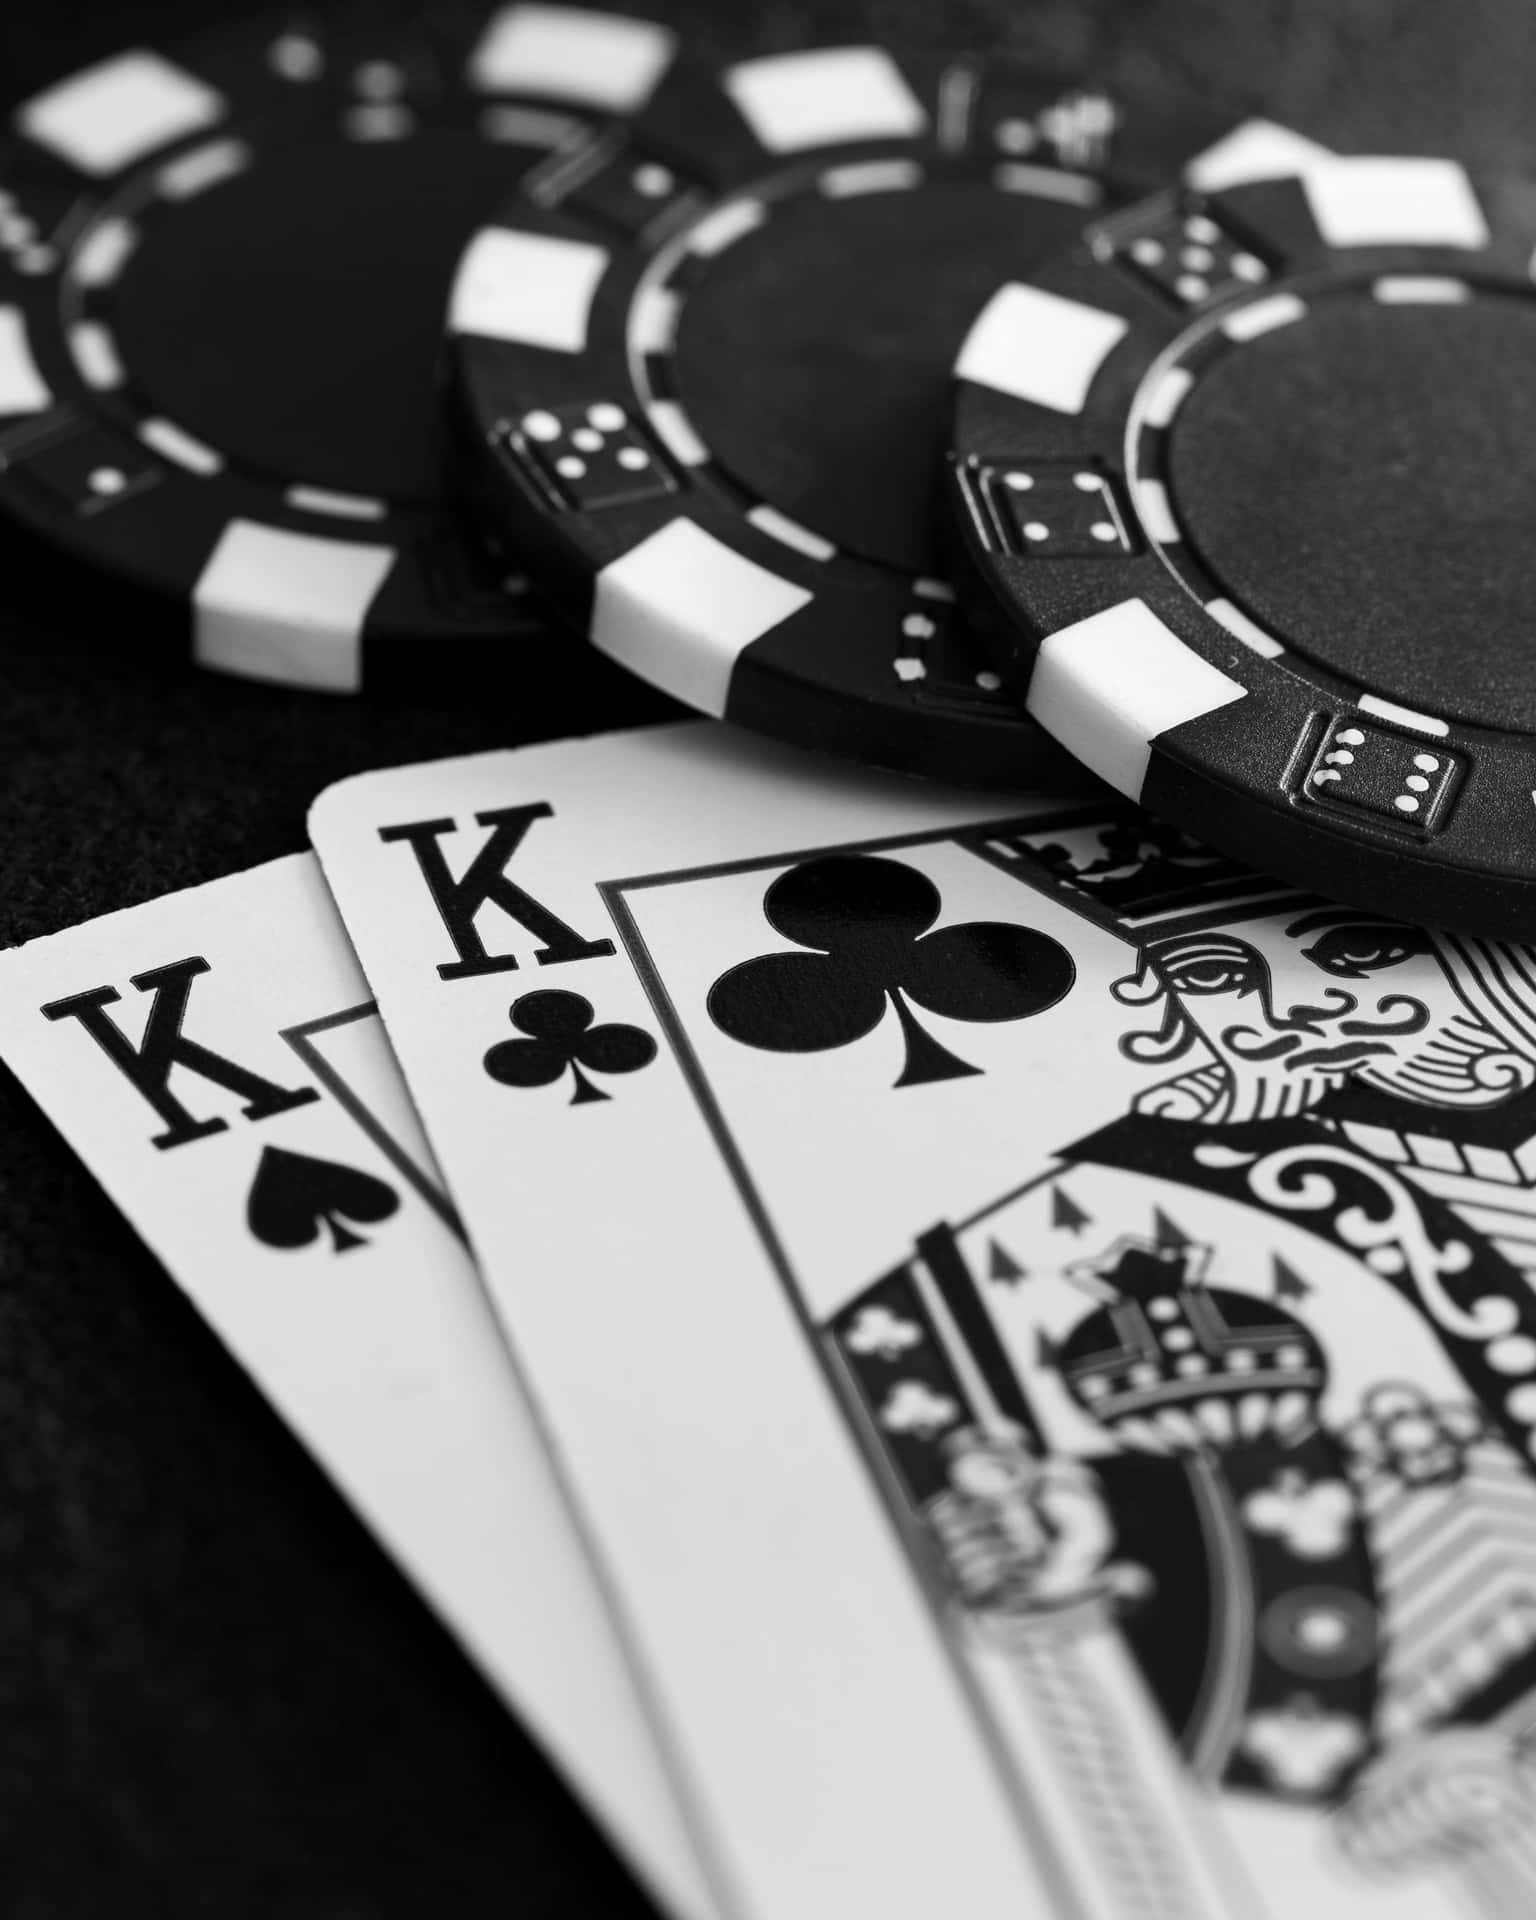 100+] Poker Background s | Wallpapers.com